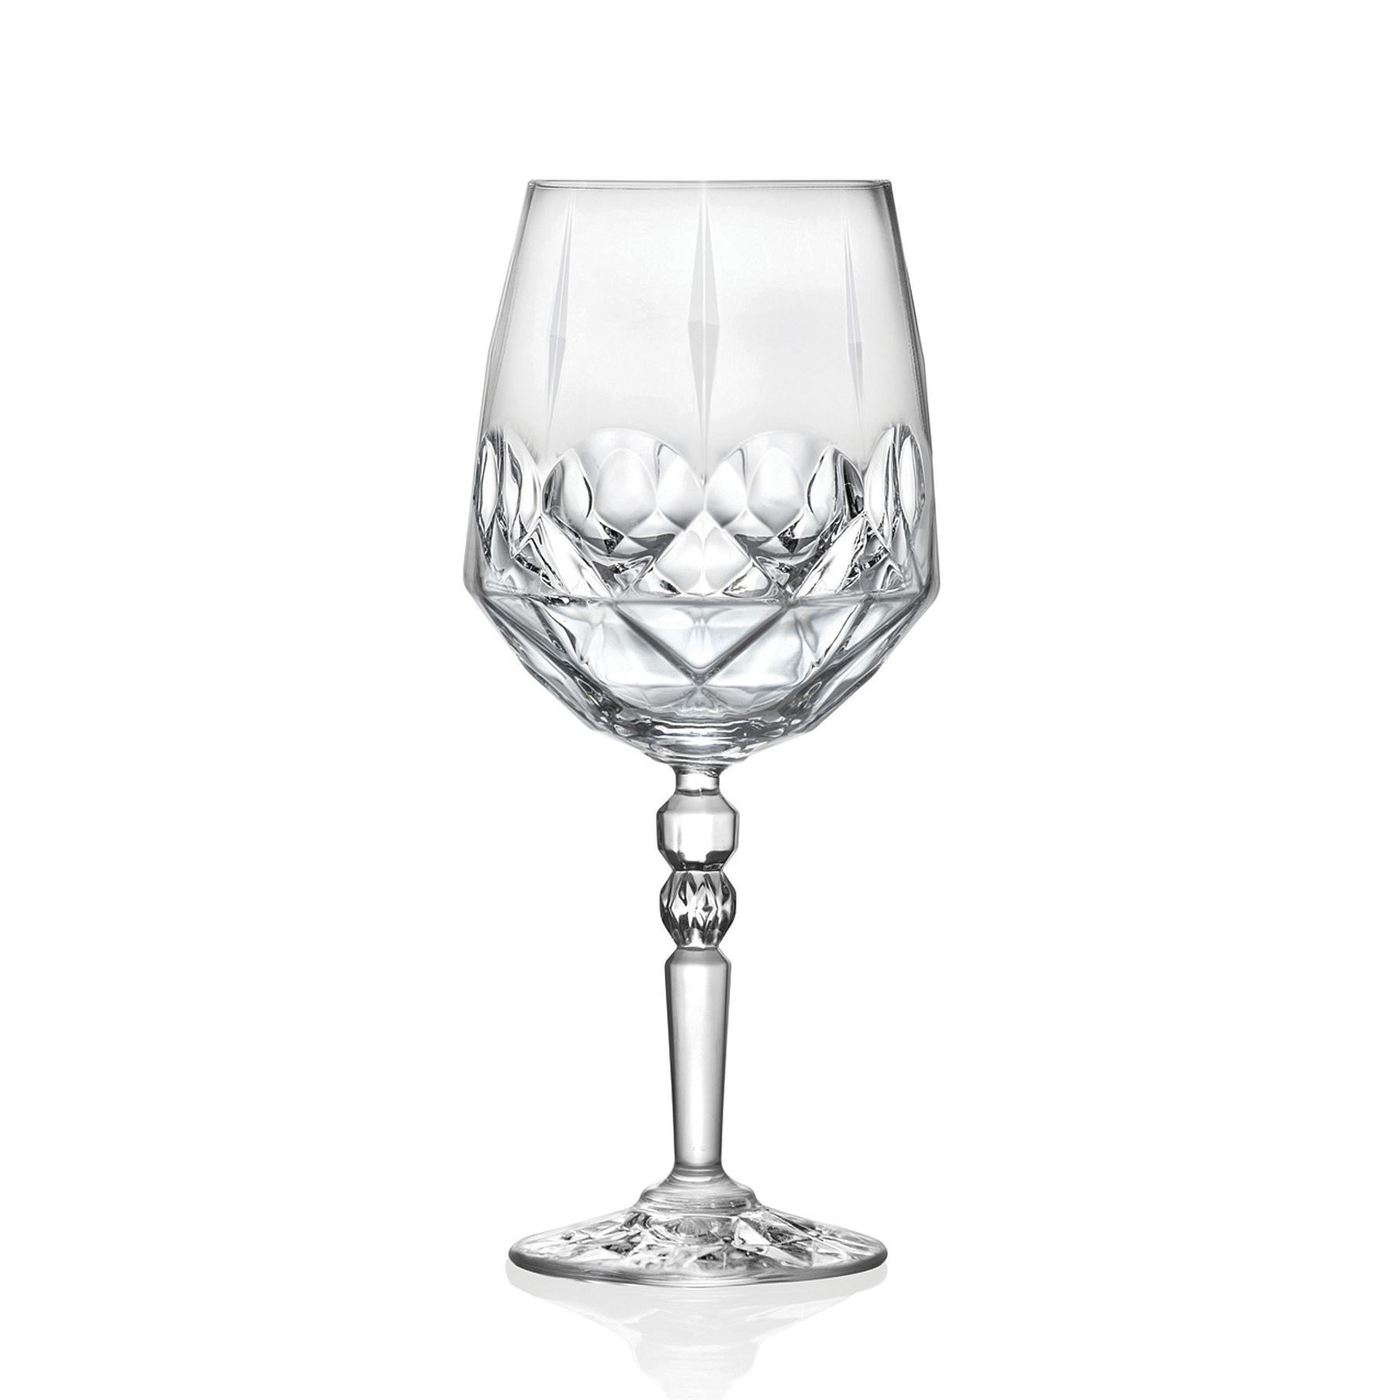 ALKEMIST COCKTAIL GLASS 66.7cl LUXION PROFESSIONAL RCR ITALY